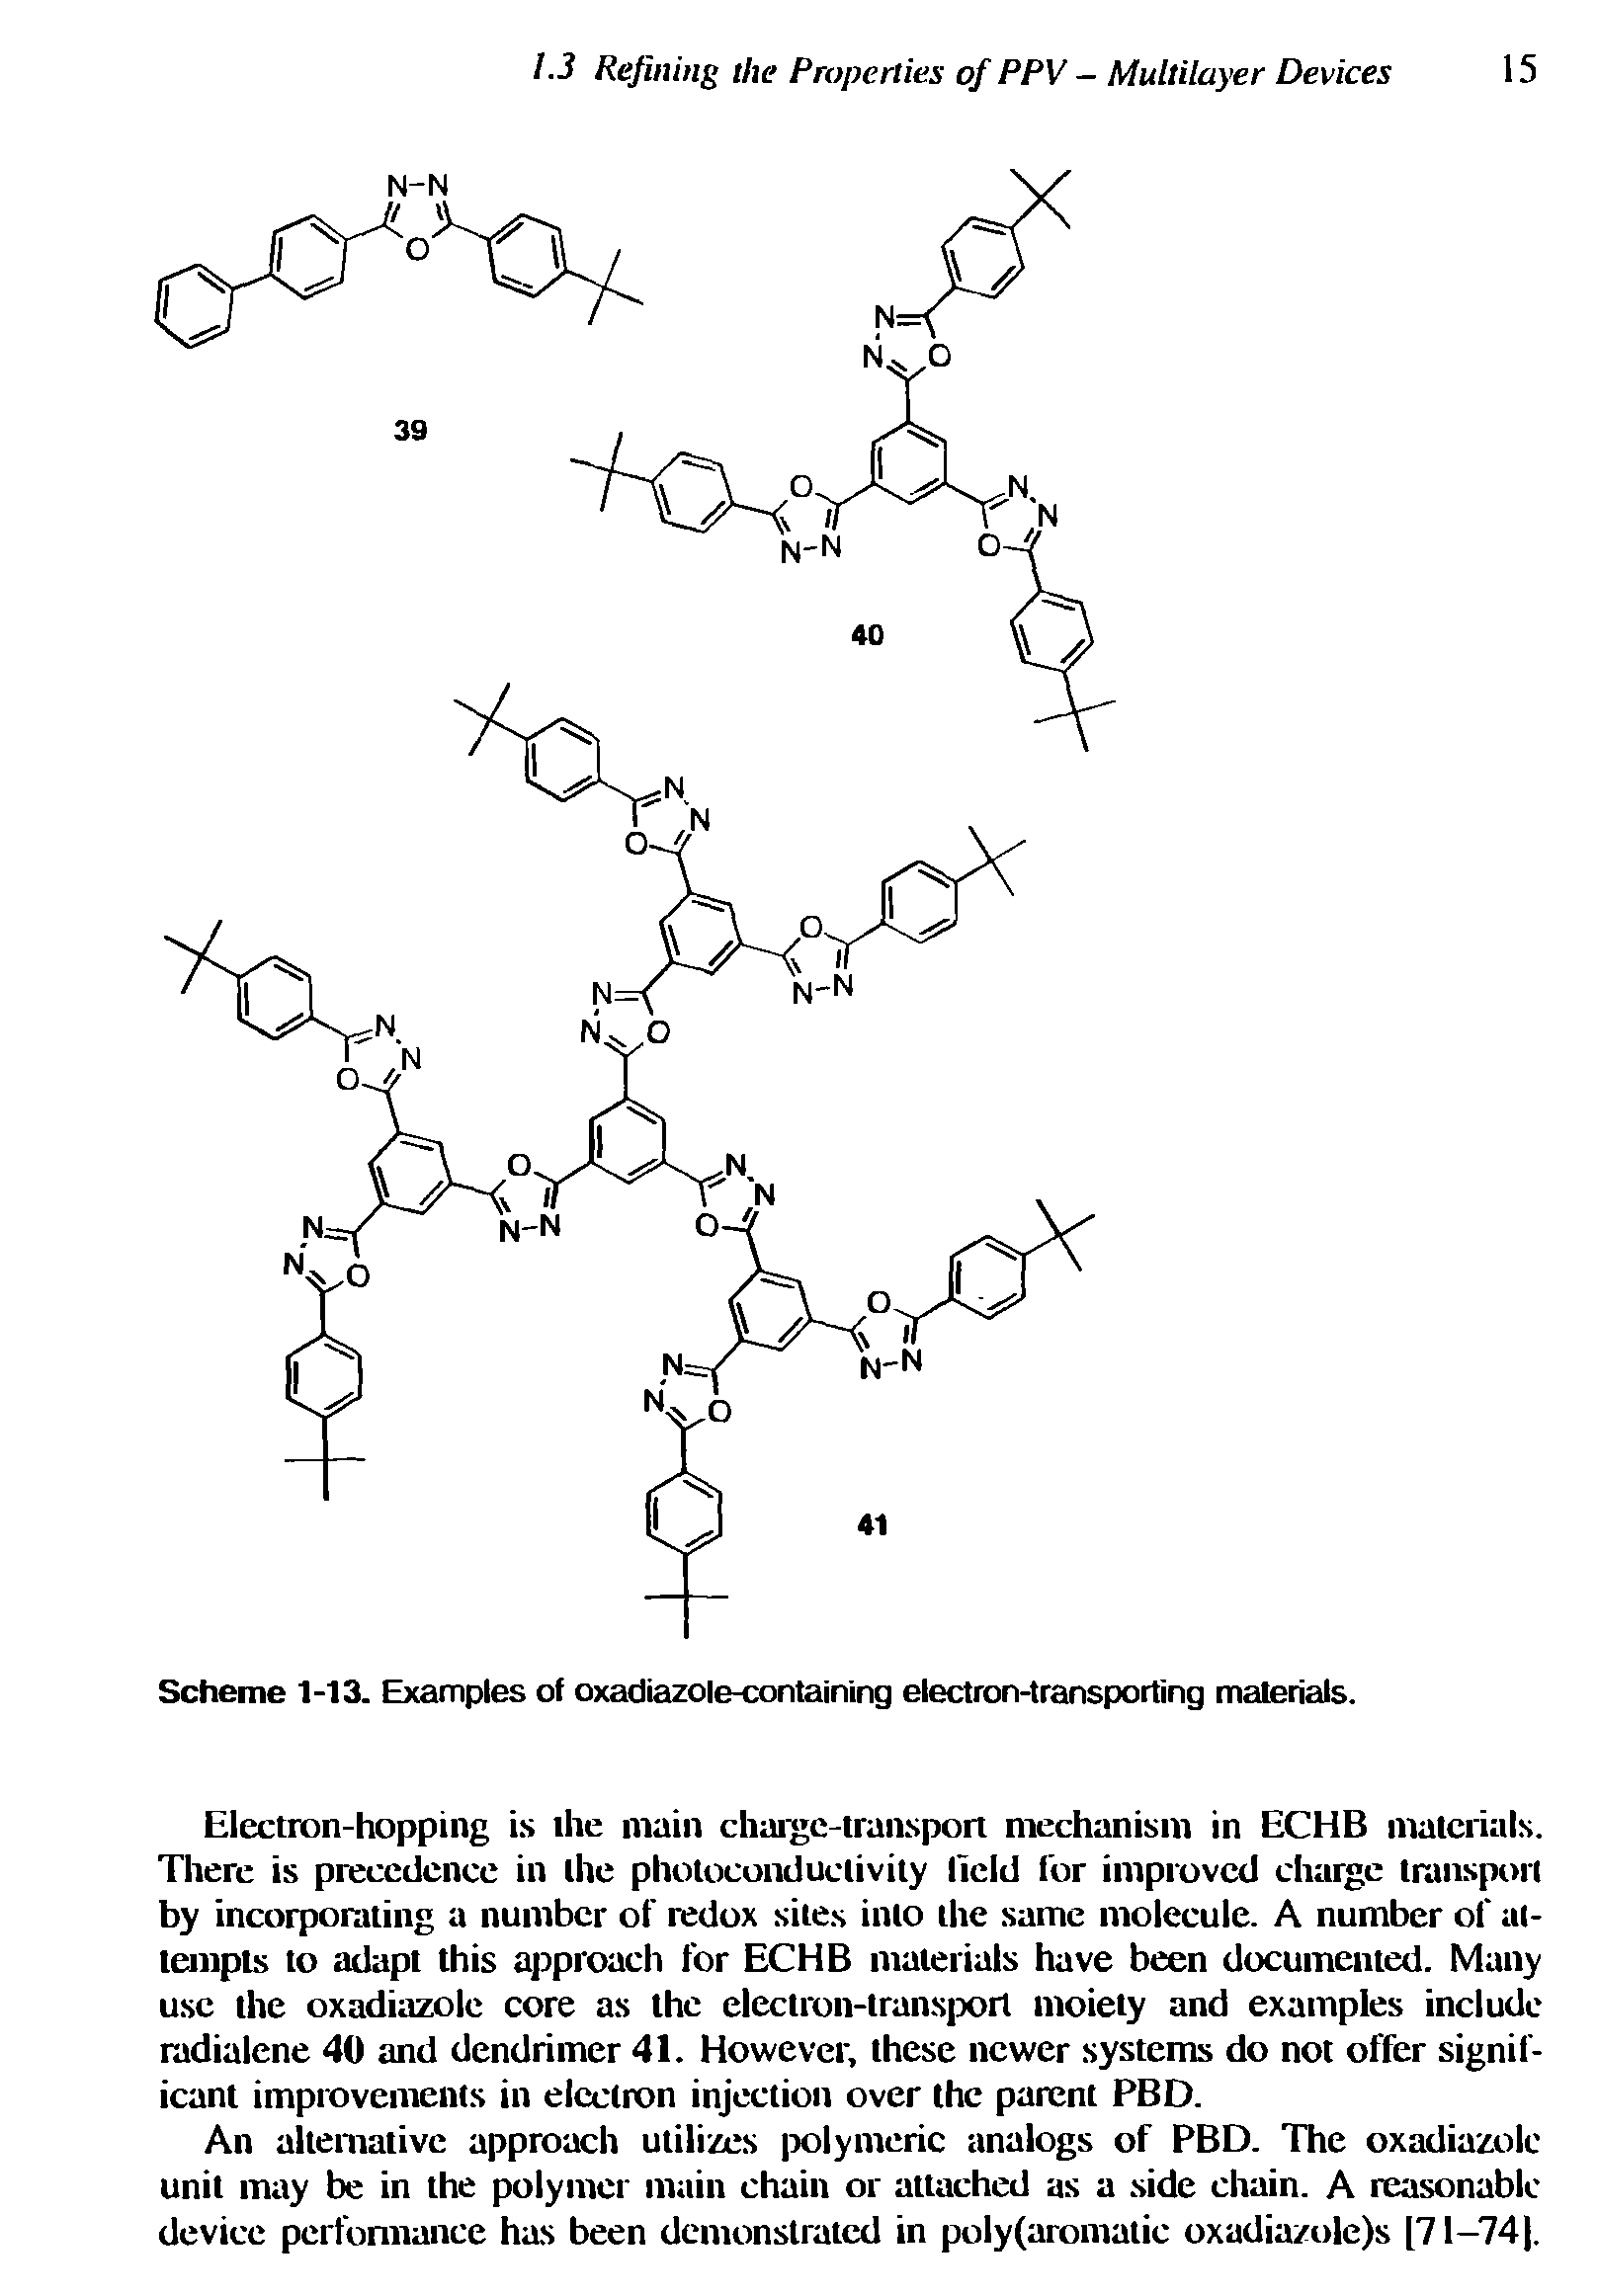 Scheme 1-13. Examples of oxadiazole-containing electron-transporting materials.